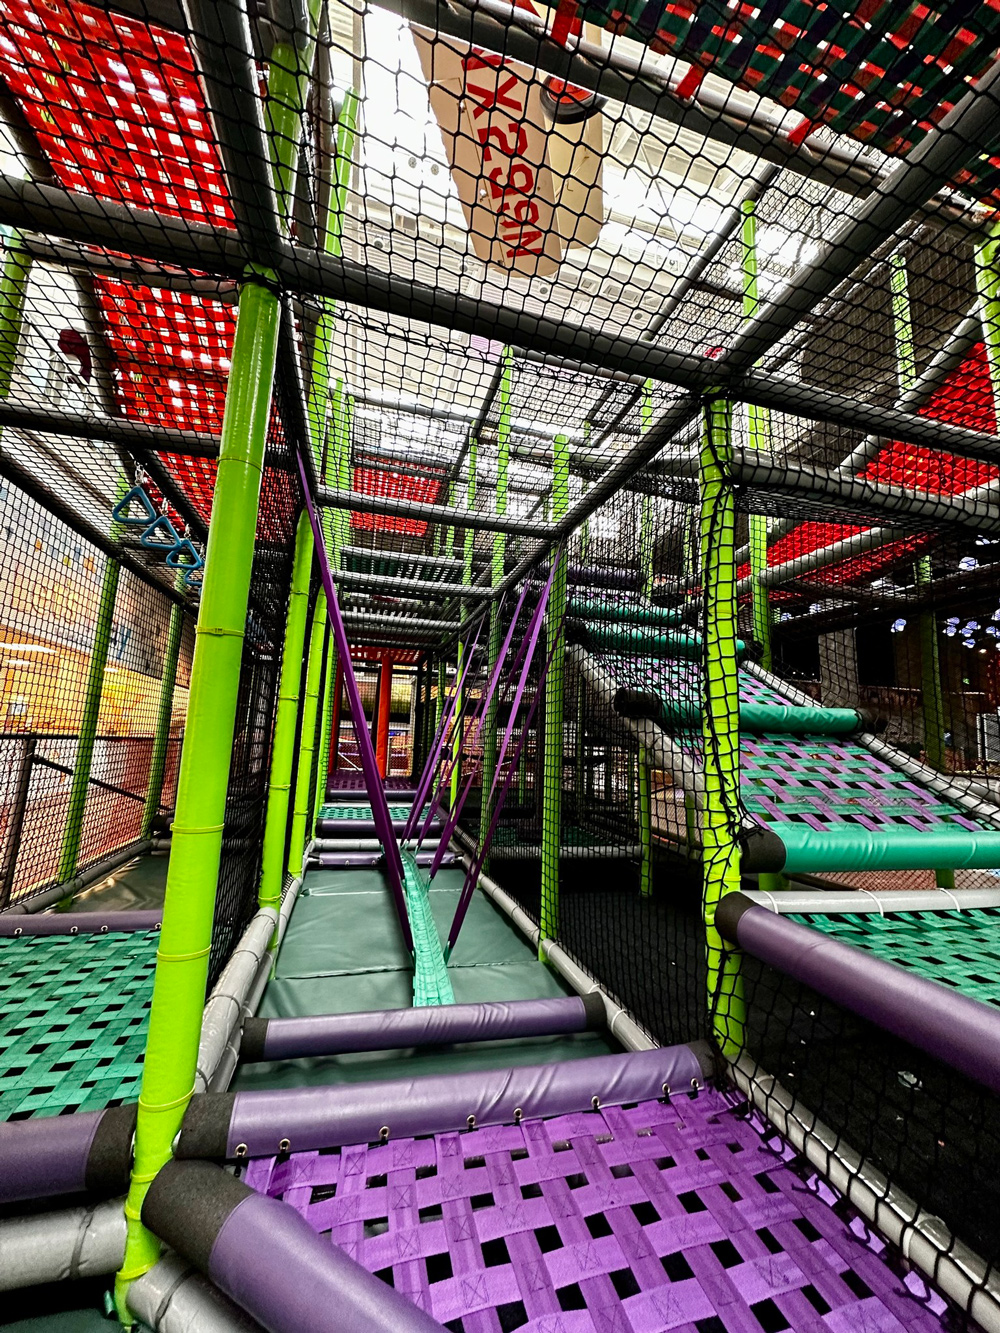 Entrance to Science City's Indoor Playground. This shot shows the multiple options and paths a child can follow when entering the climber.